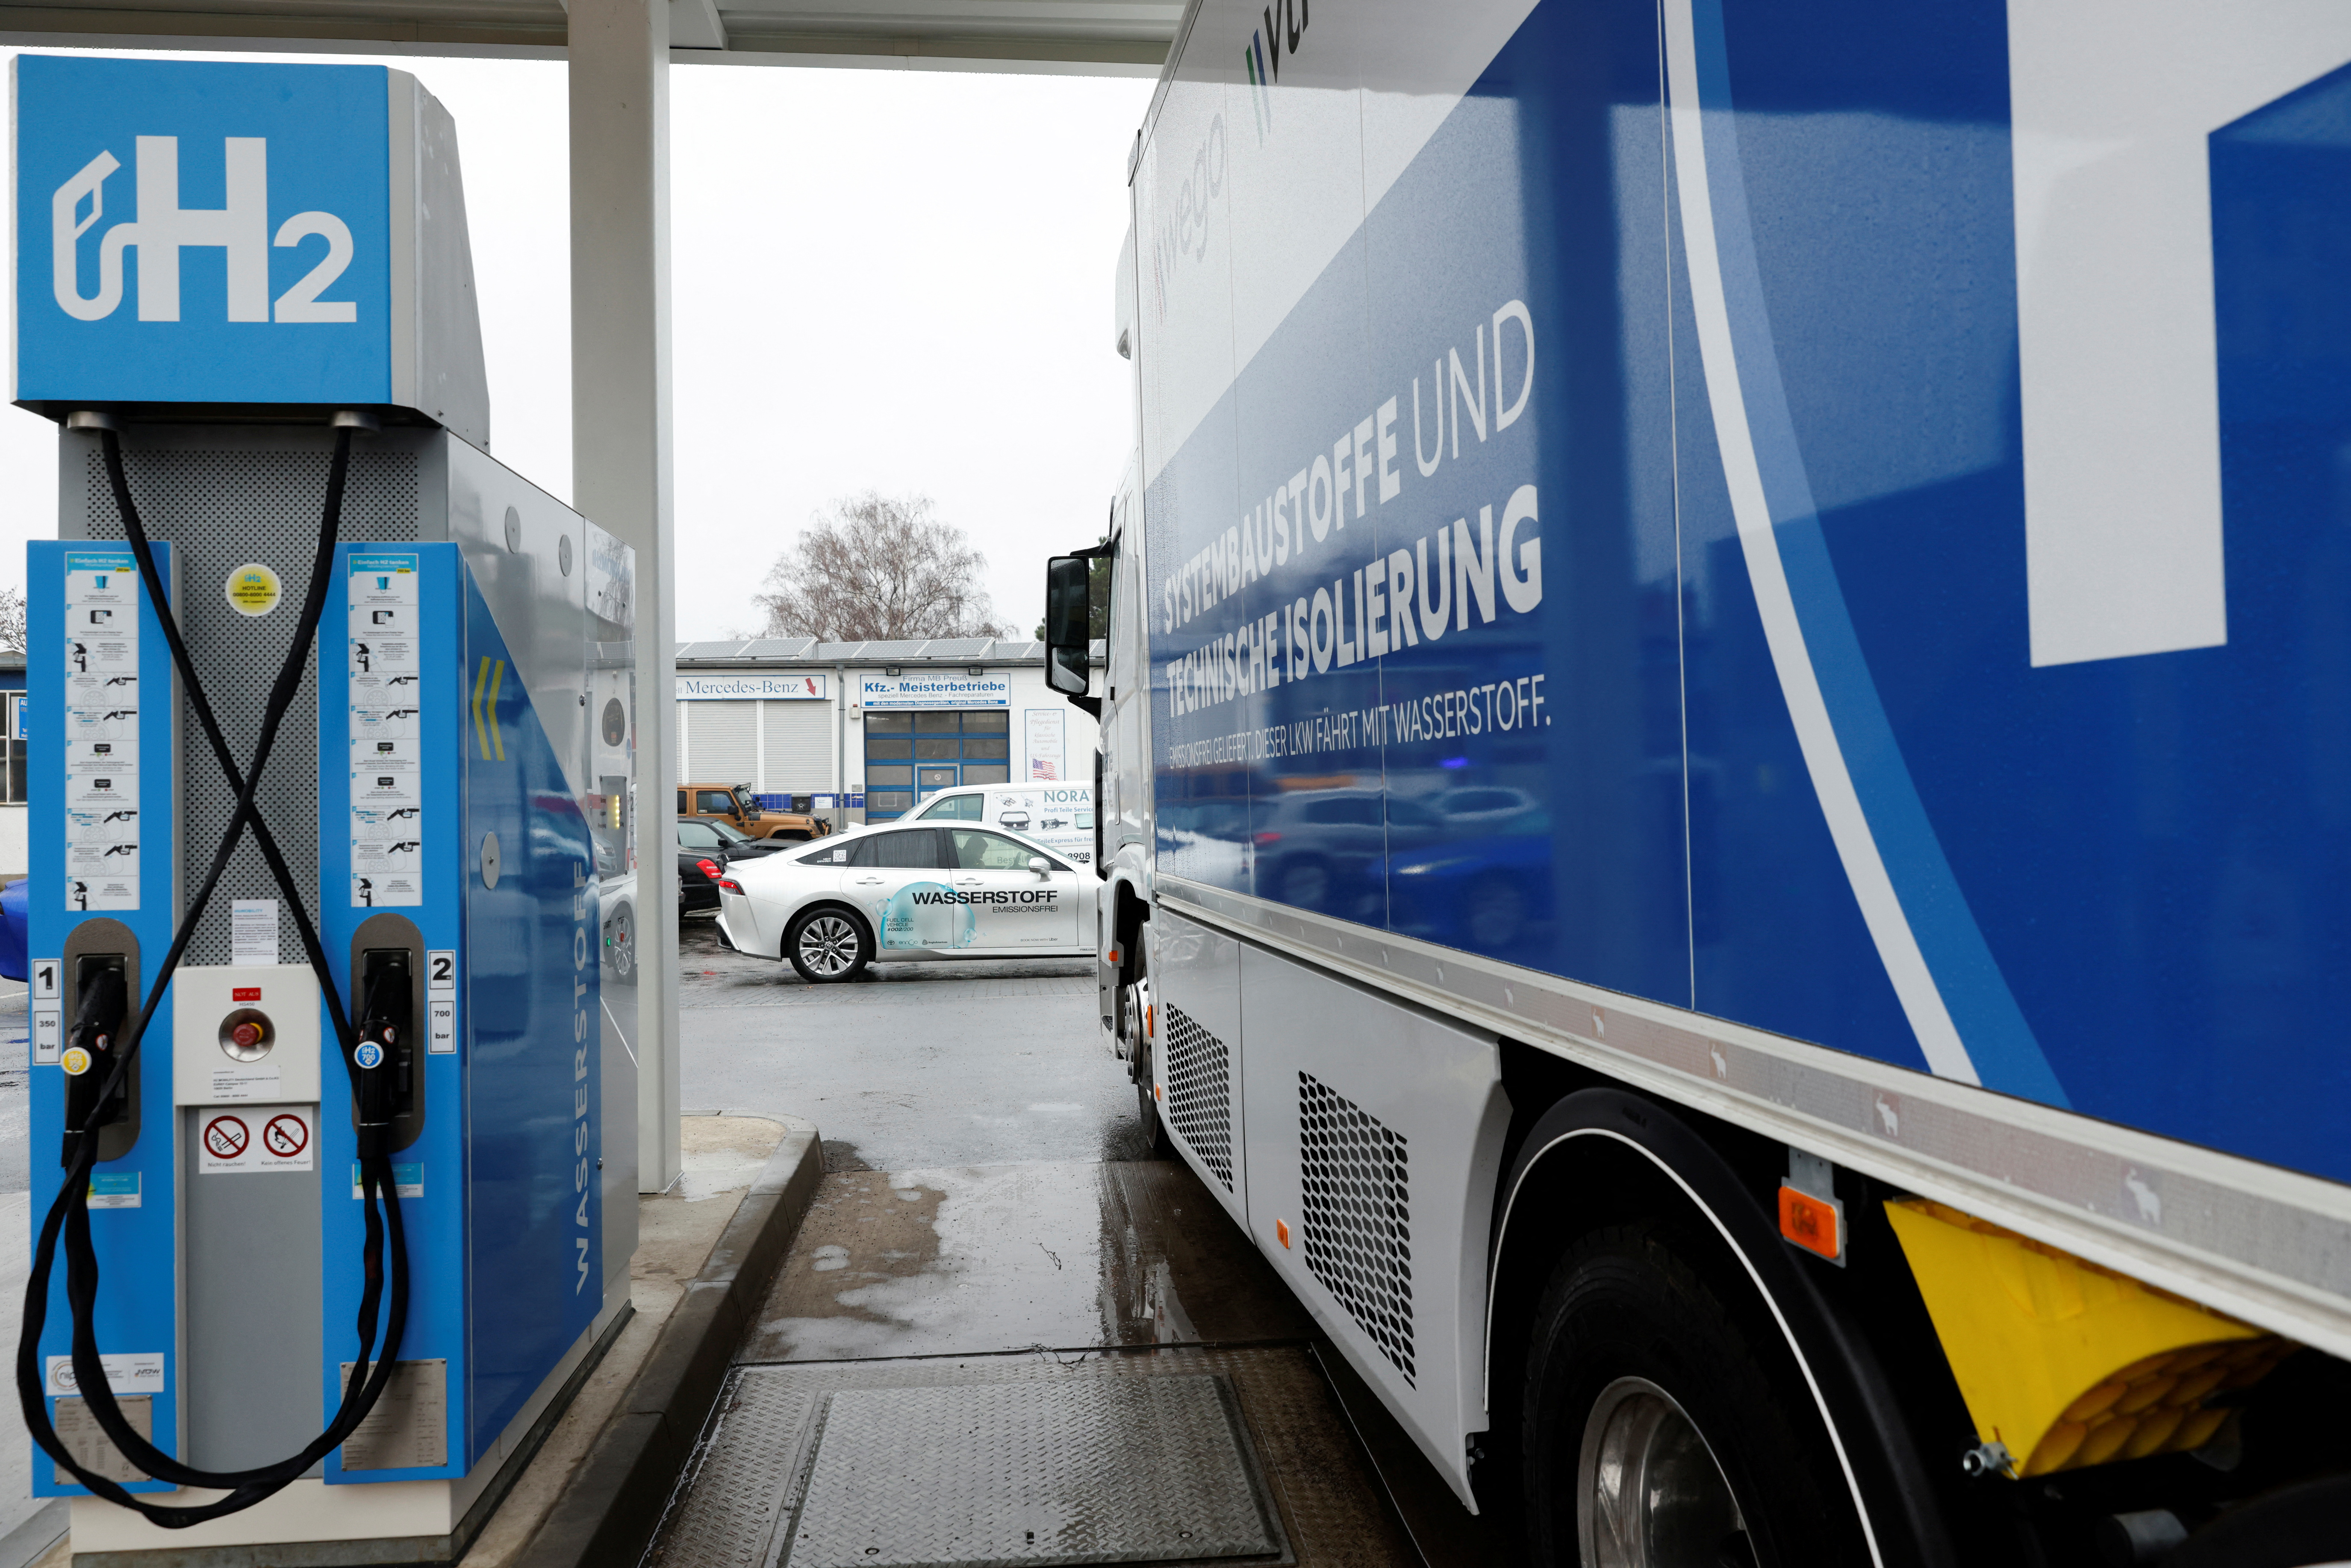 Hydrogen H2 Filling Nozzles are plugged into a hydrogen filling station for trucks and cars in Berlin, Germany January 11, 2023. REUTERS/Michele Tantussi